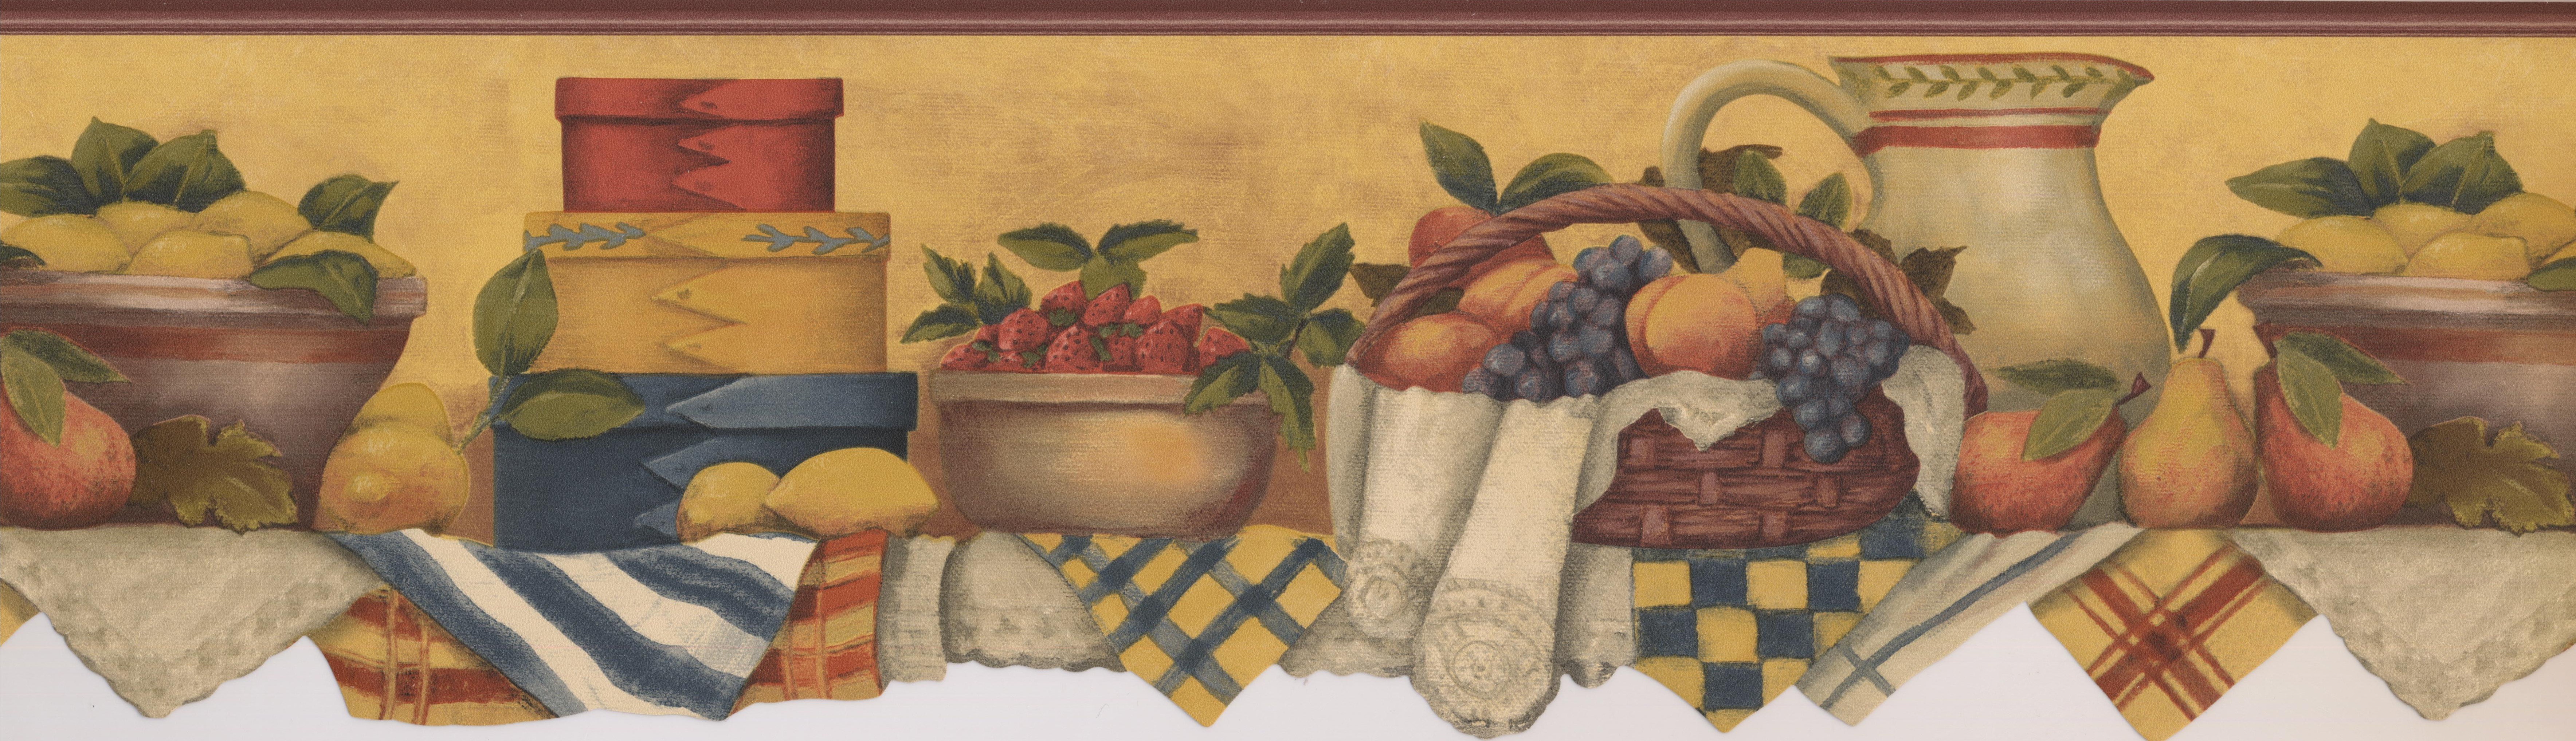 Kitchen Table With Fruit Basket Jug Berries Mustard - Visual Arts , HD Wallpaper & Backgrounds